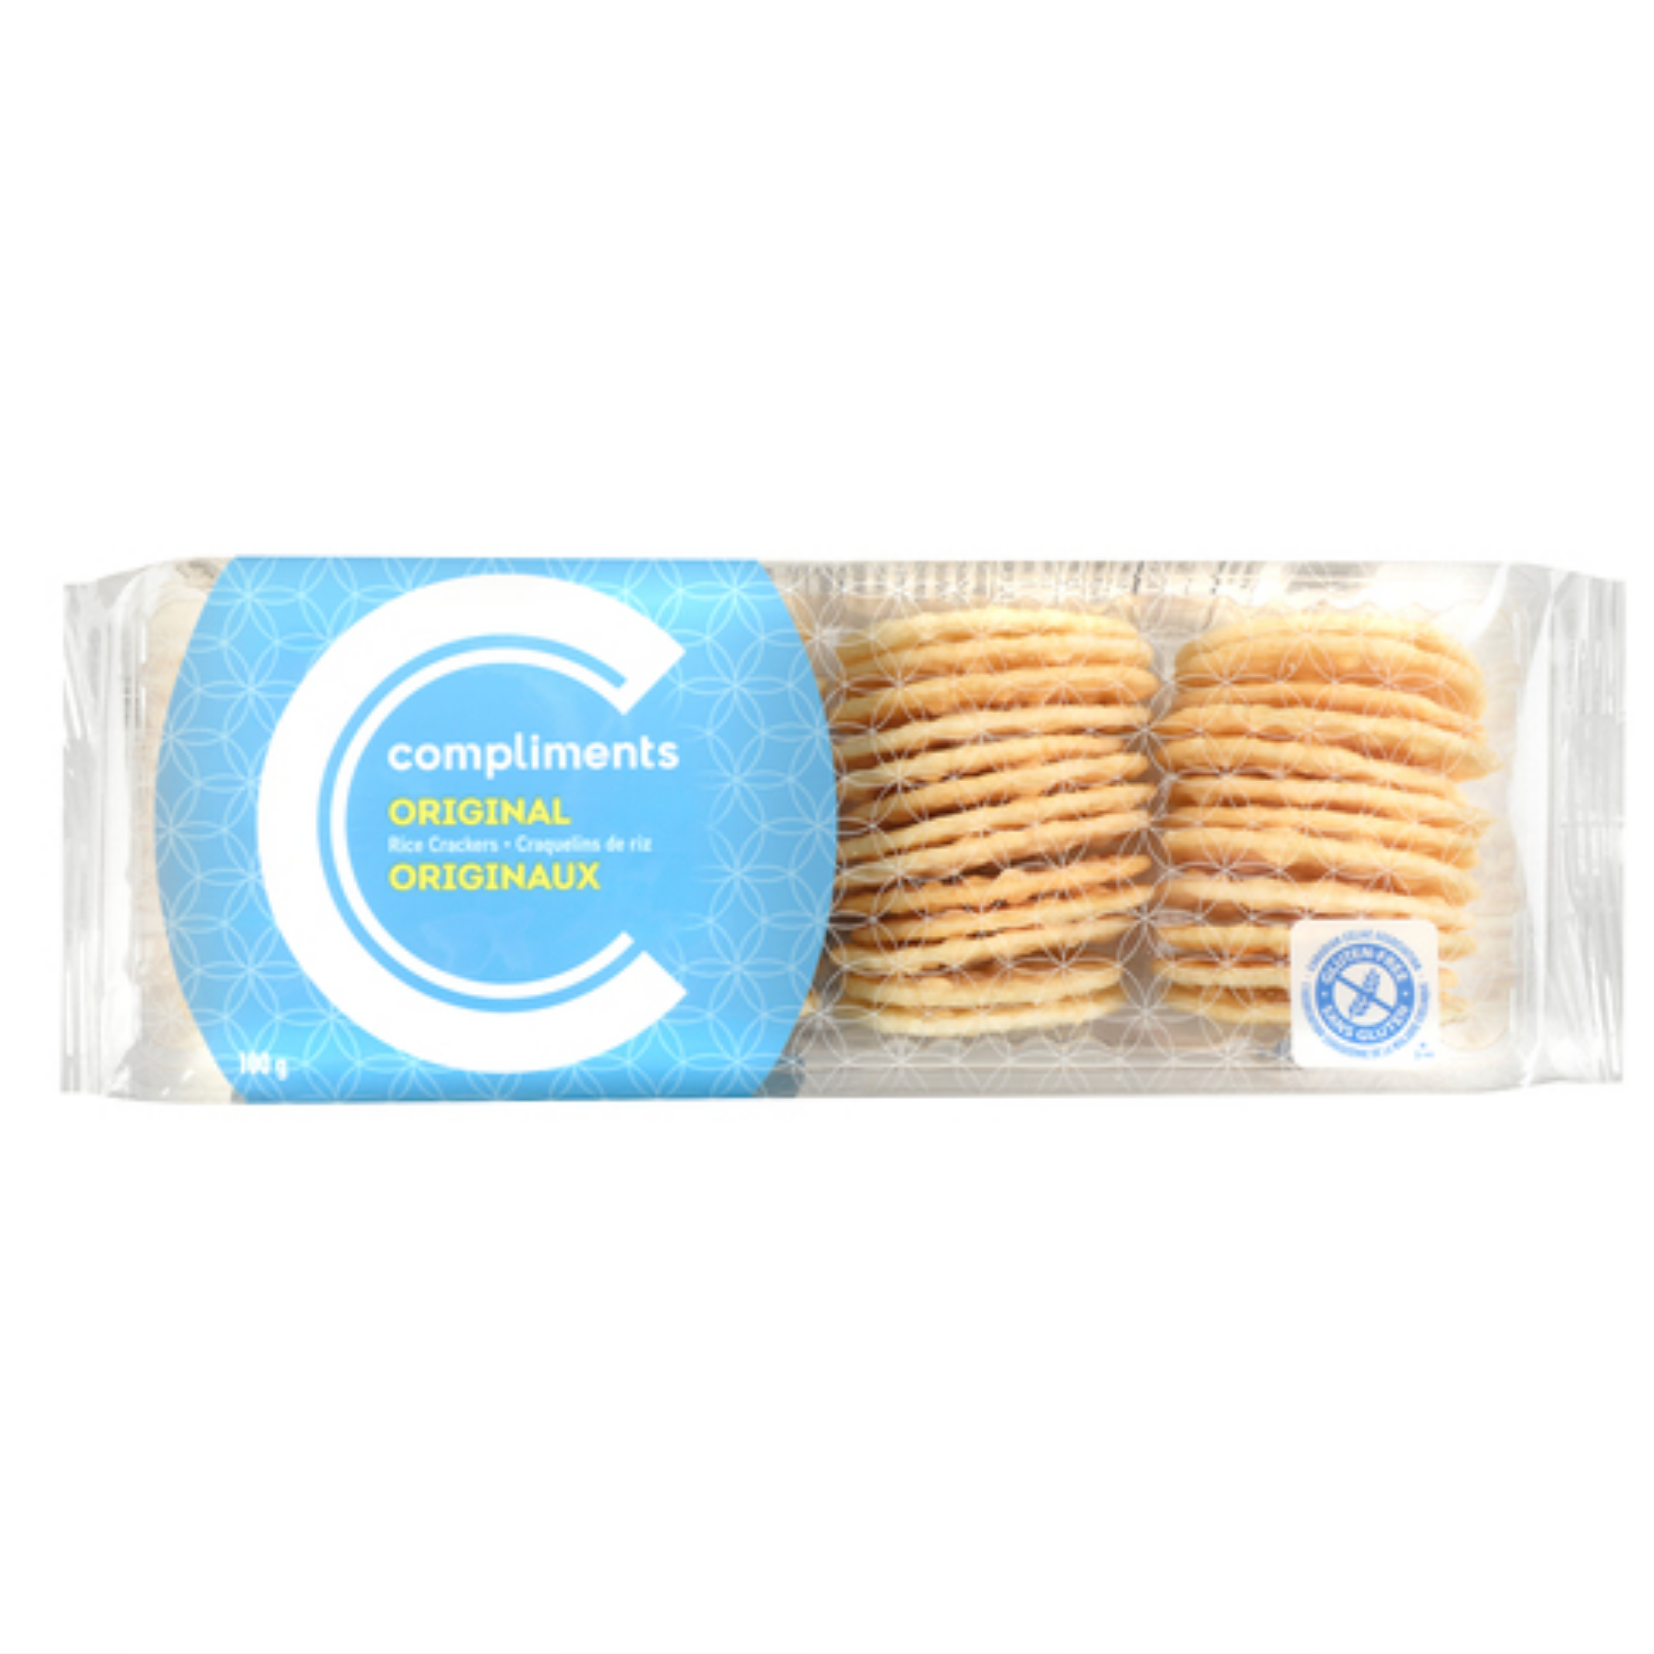 Compliments Original Rice Crackers 100g